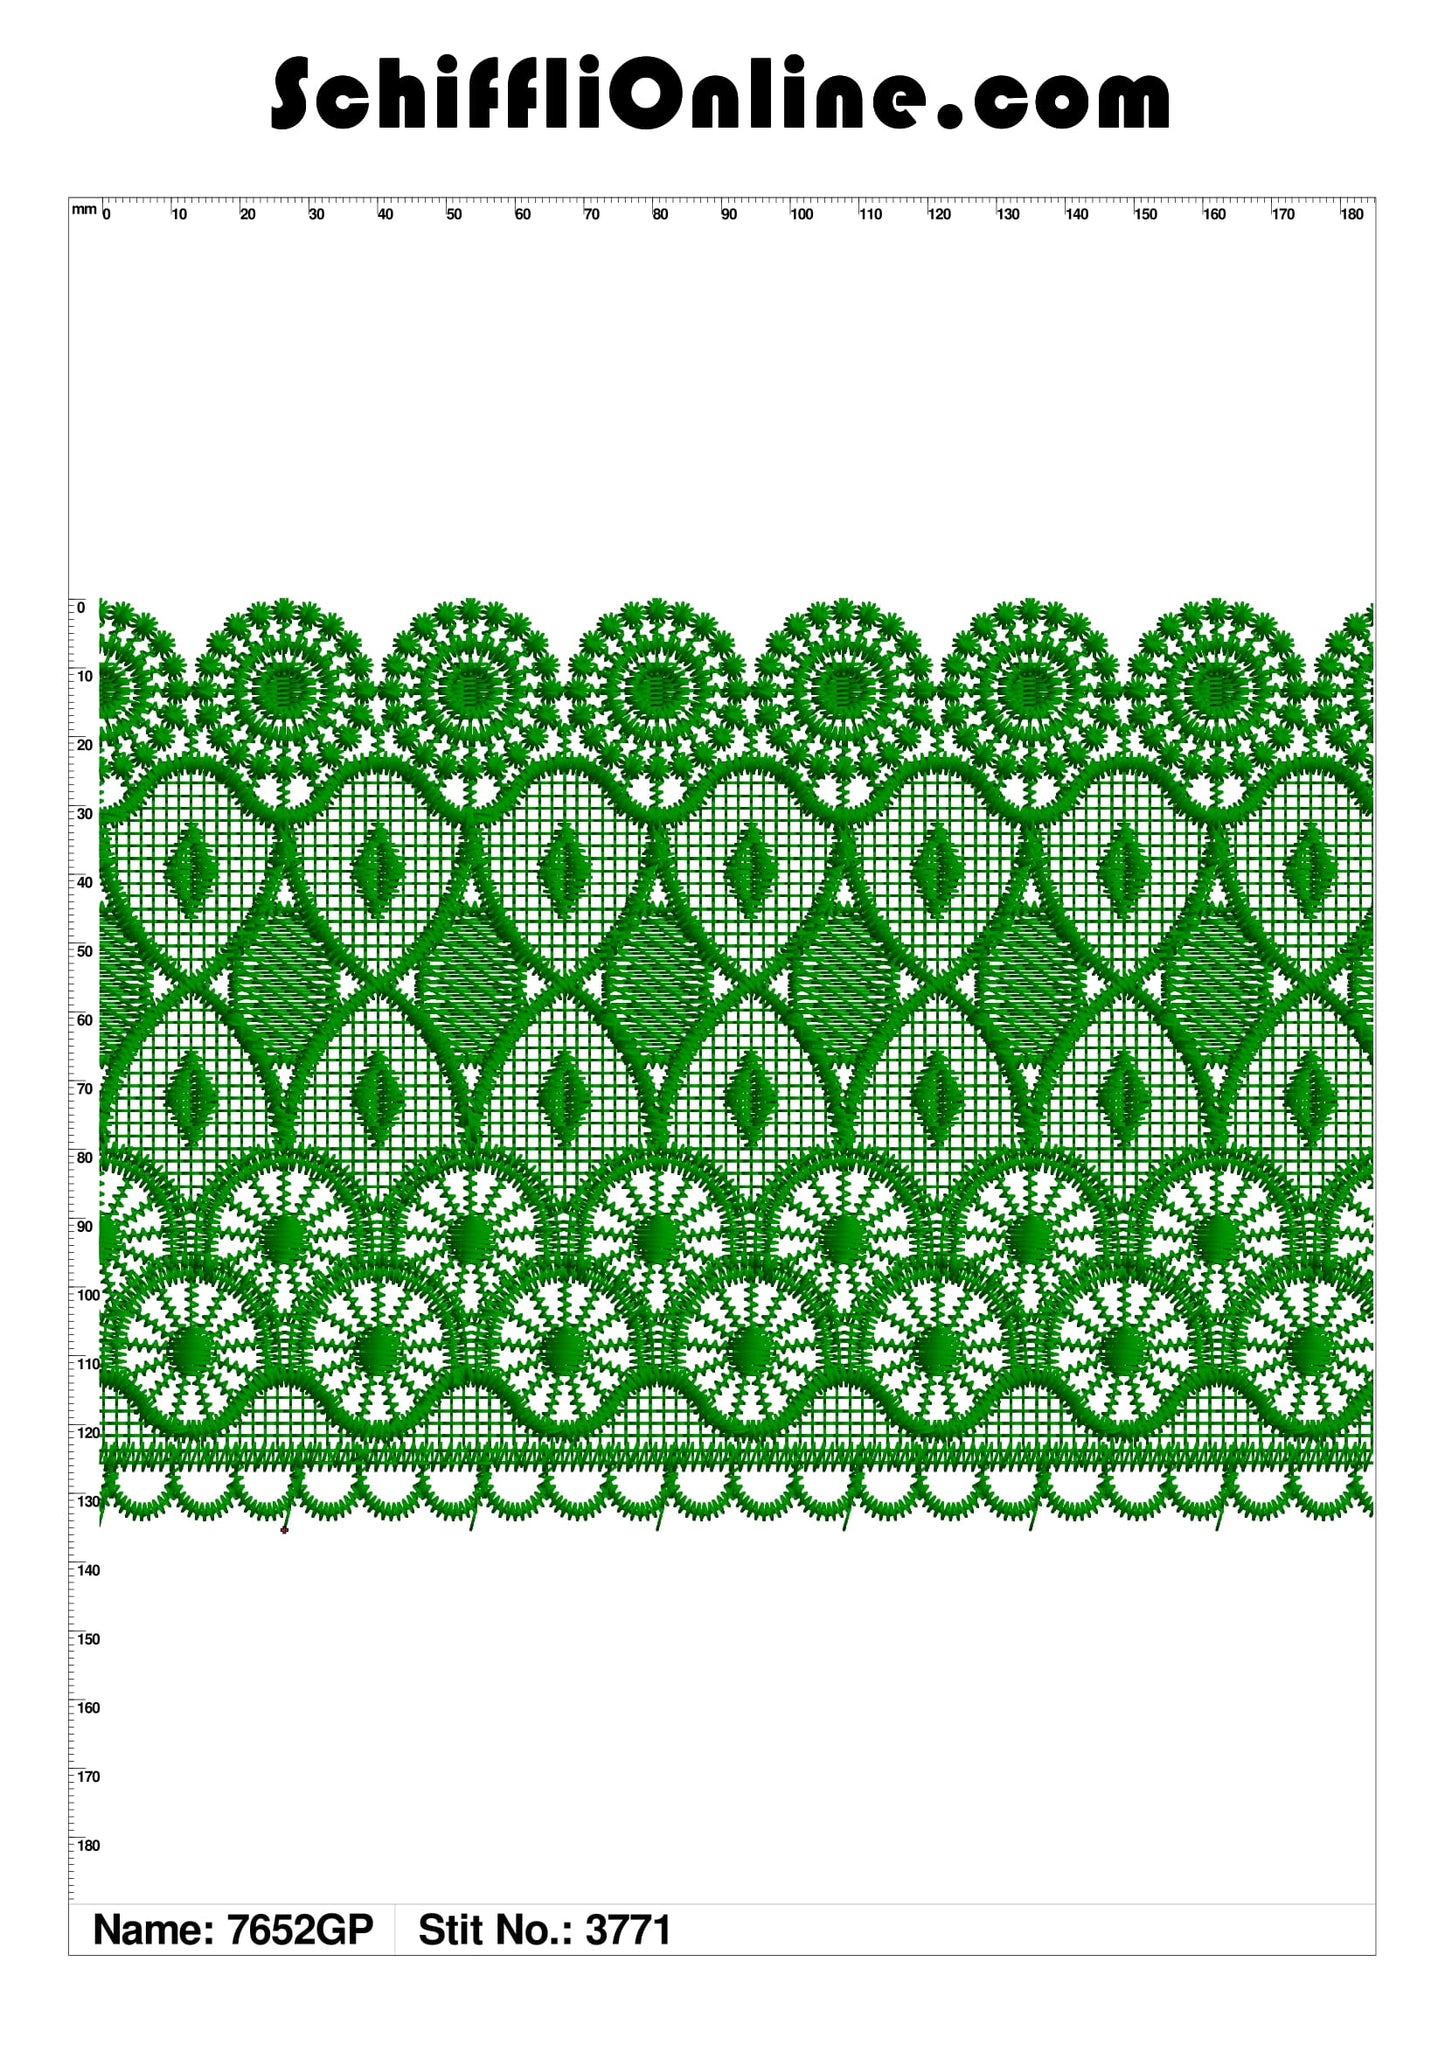 Book 154 CHEMICAL LACE 4X4 50 DESIGNS